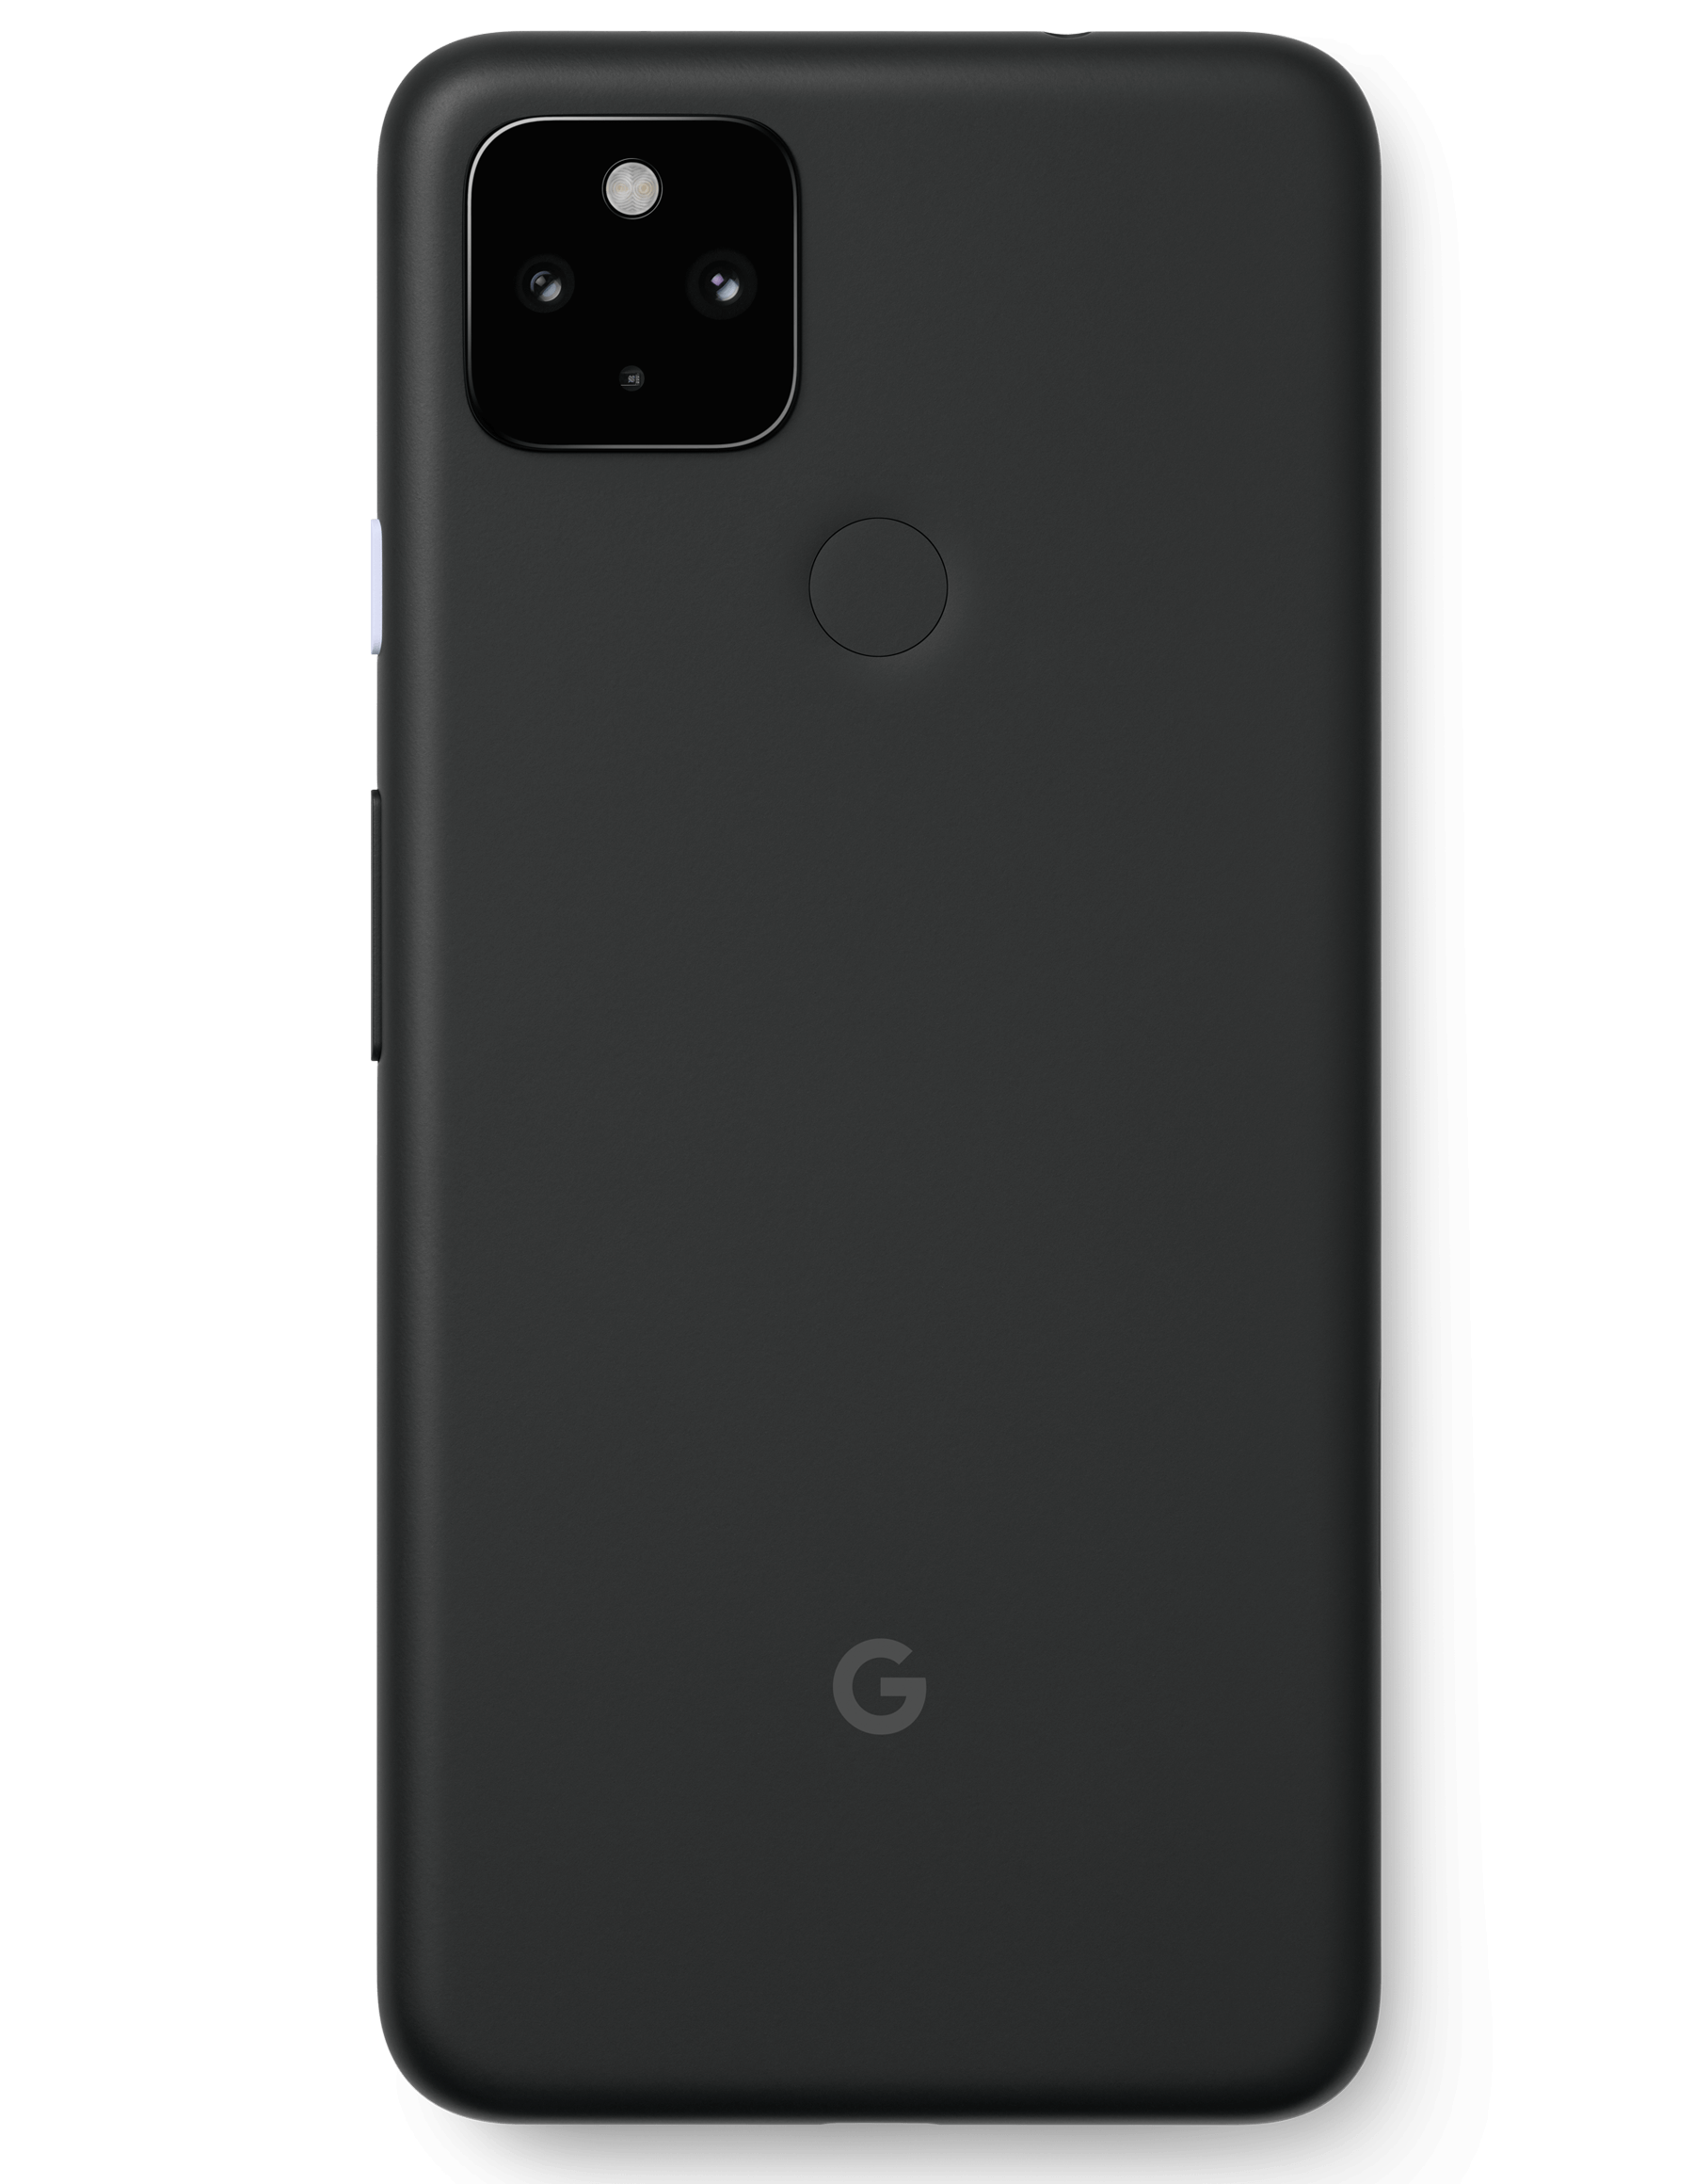 Green Pixel 5 appears in high-res renders - 9to5Google